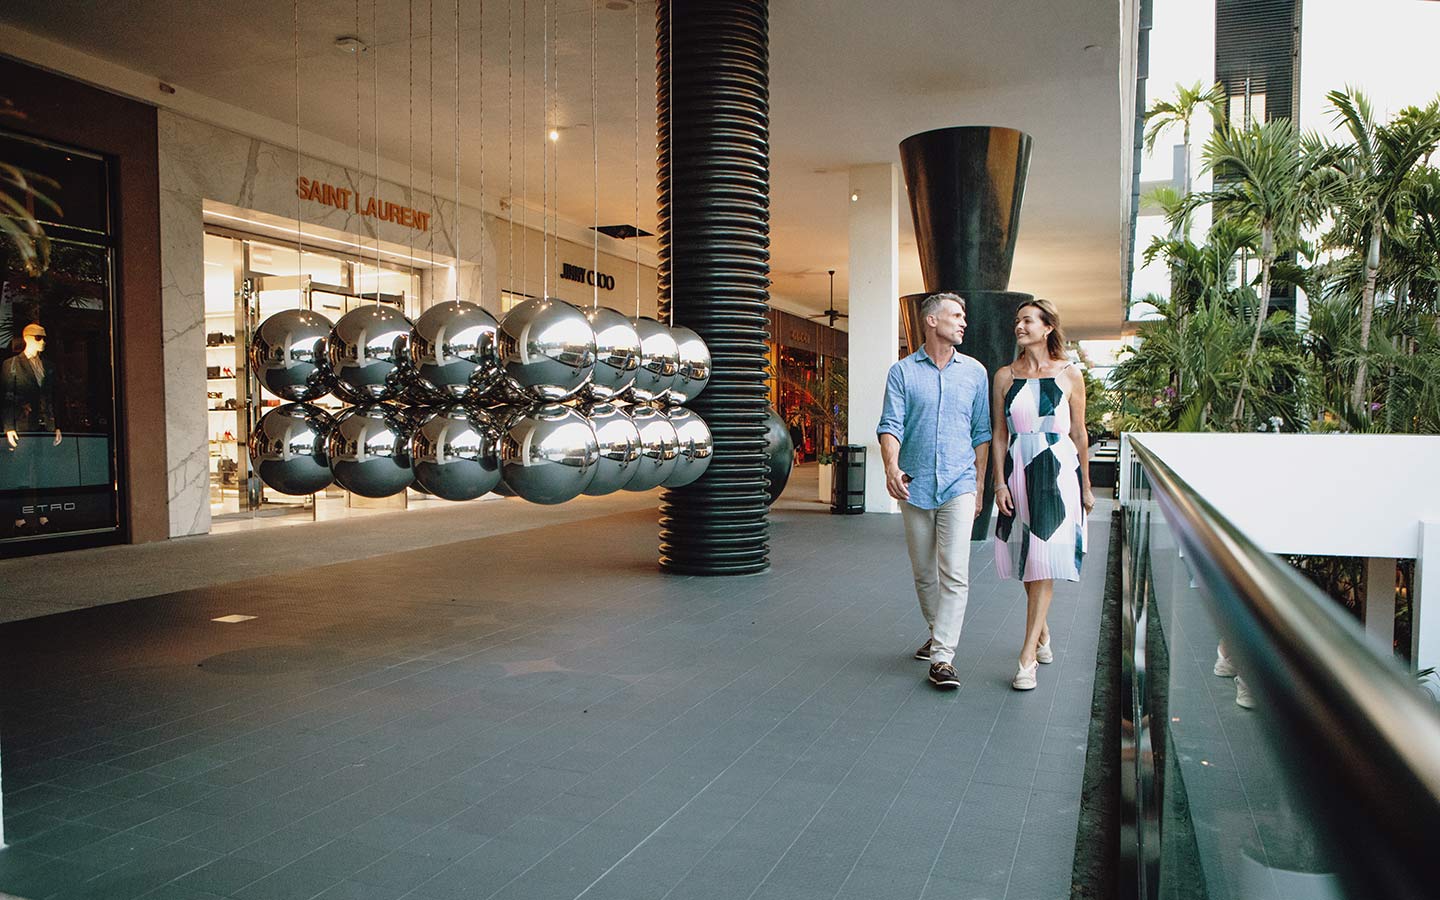 Bal Harbour Shops is one of the best places to shop in Miami